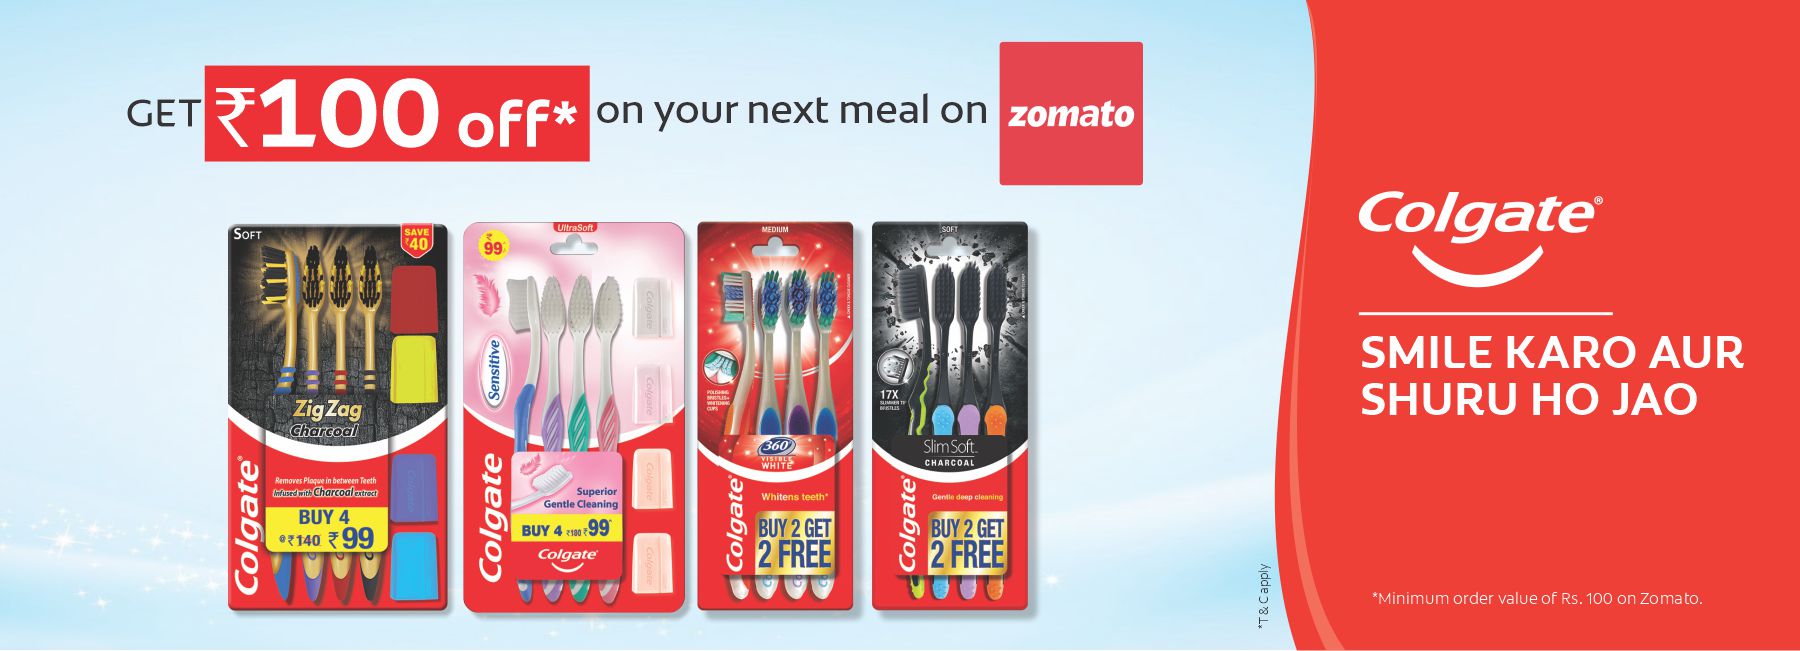 Colgate Zomato Offer Get Flat Rs 100 OFF Free Voucher